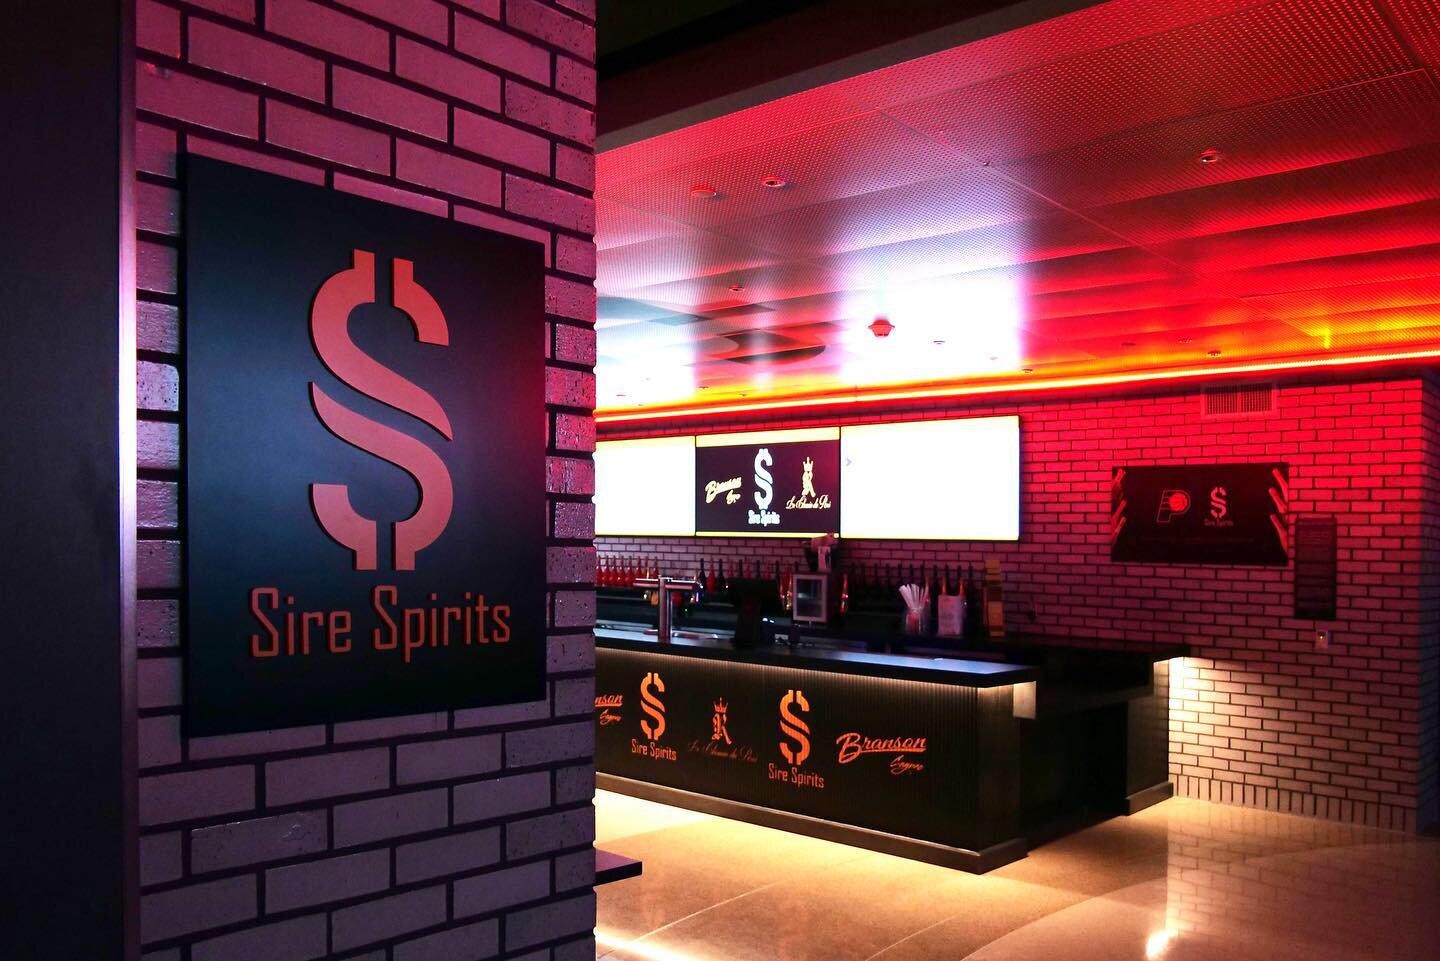 You can find us in the club, designing bottles full of bub&rsquo;. We&rsquo;re excited to highlight the recent collaboration with the Indiana Pacers and 50 Cent&rsquo;s spirits brand, Sire Spirits. #S127 had the opportunity to create dazzling signage